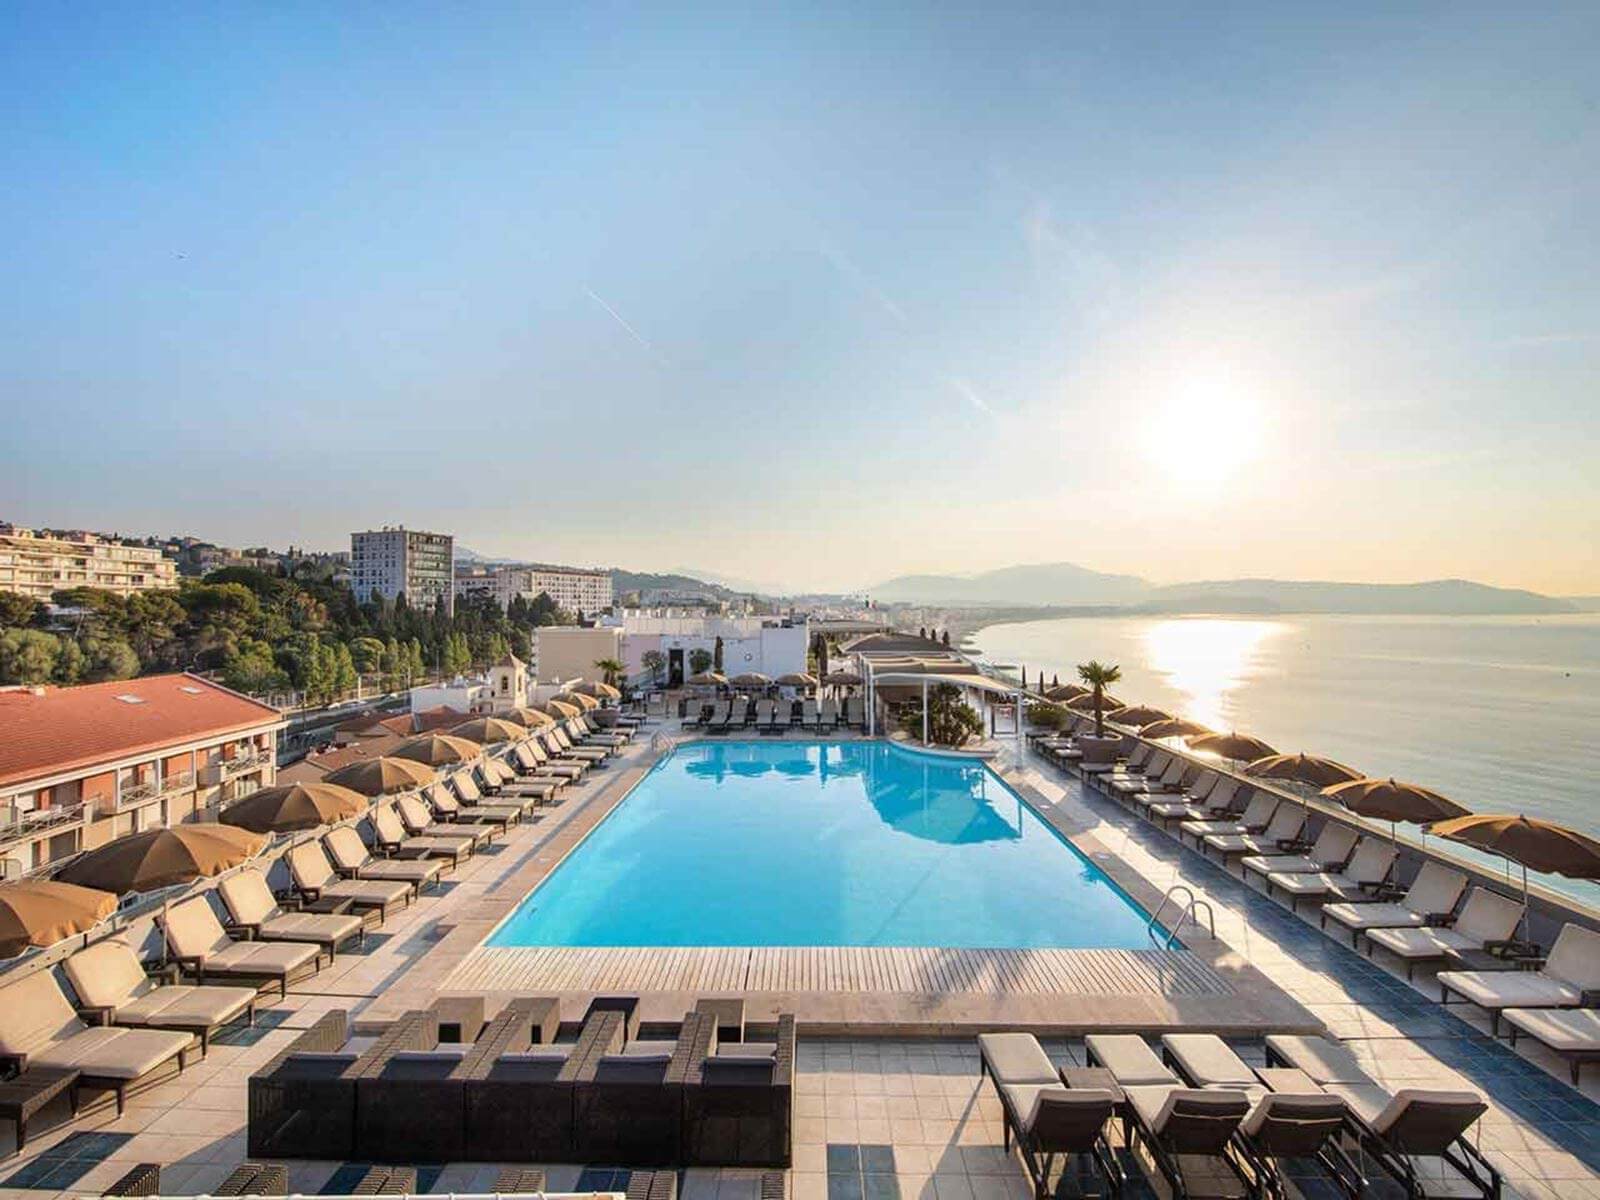 Image of the large outdoor pool on a terrace overlooking the sea